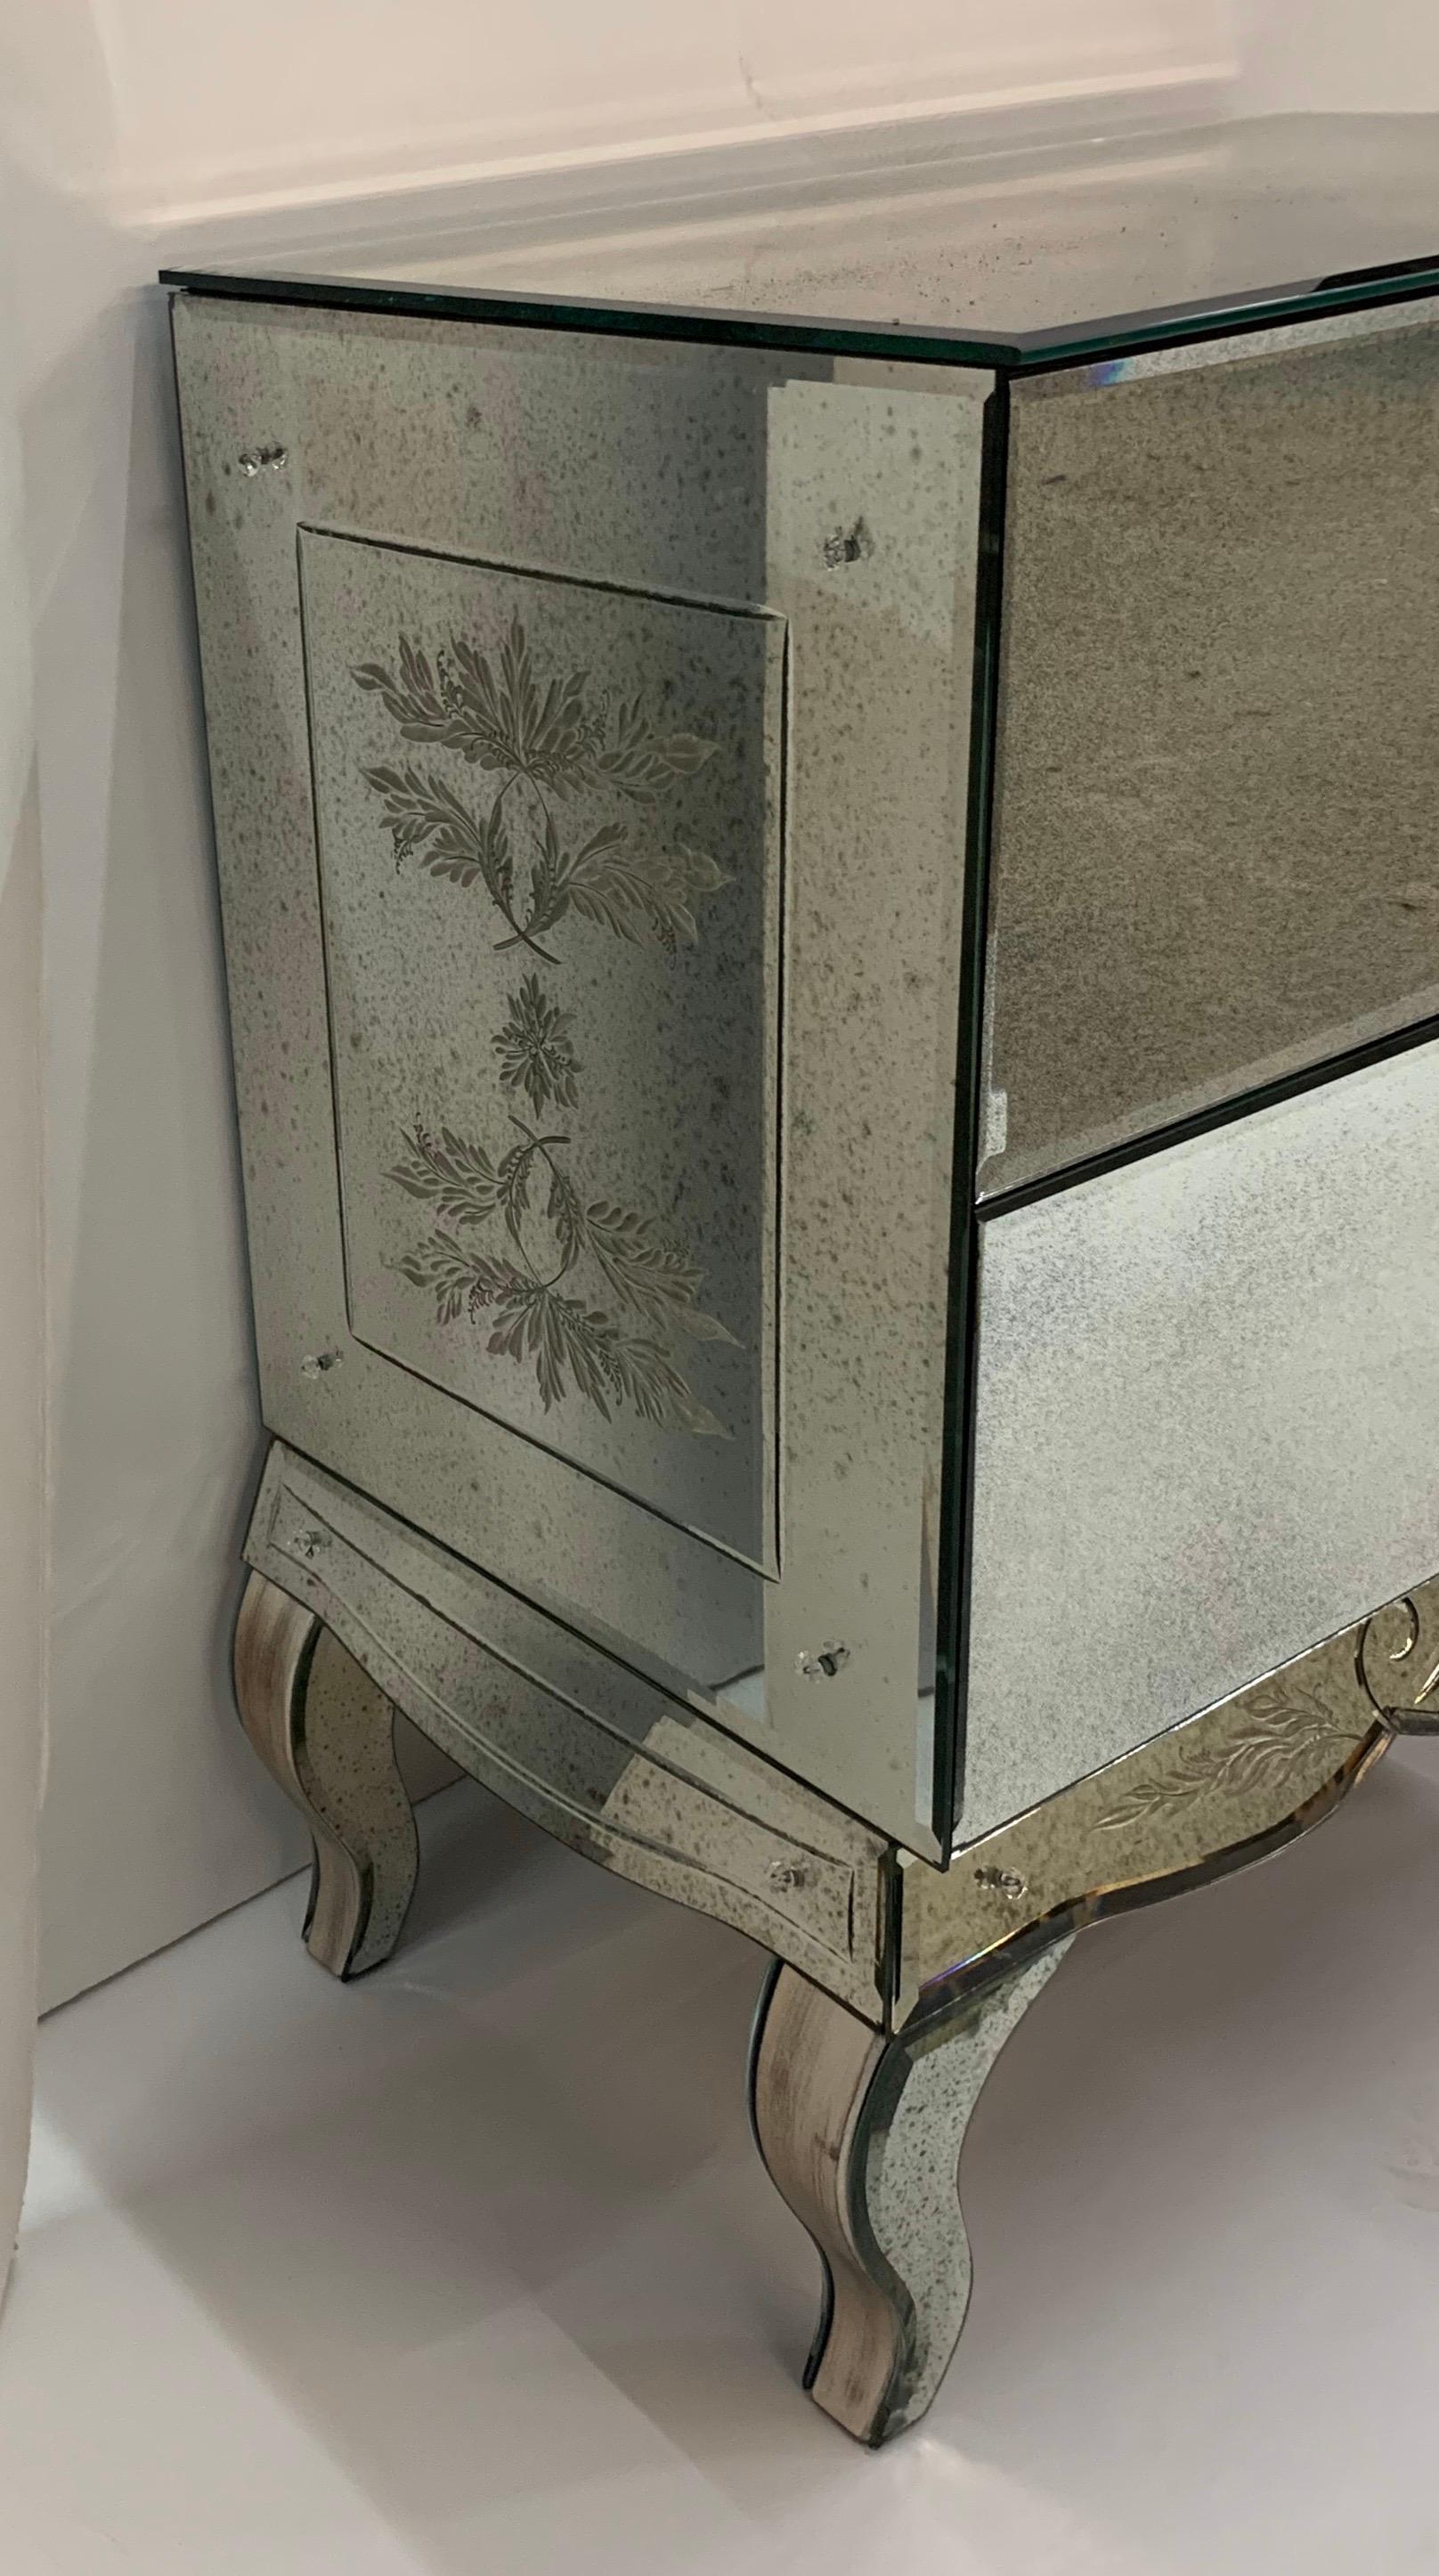 North American Wonderful Lorin Marsh Etched Two-Drawer Mirrored Chest with Flower Rosette Pulls For Sale